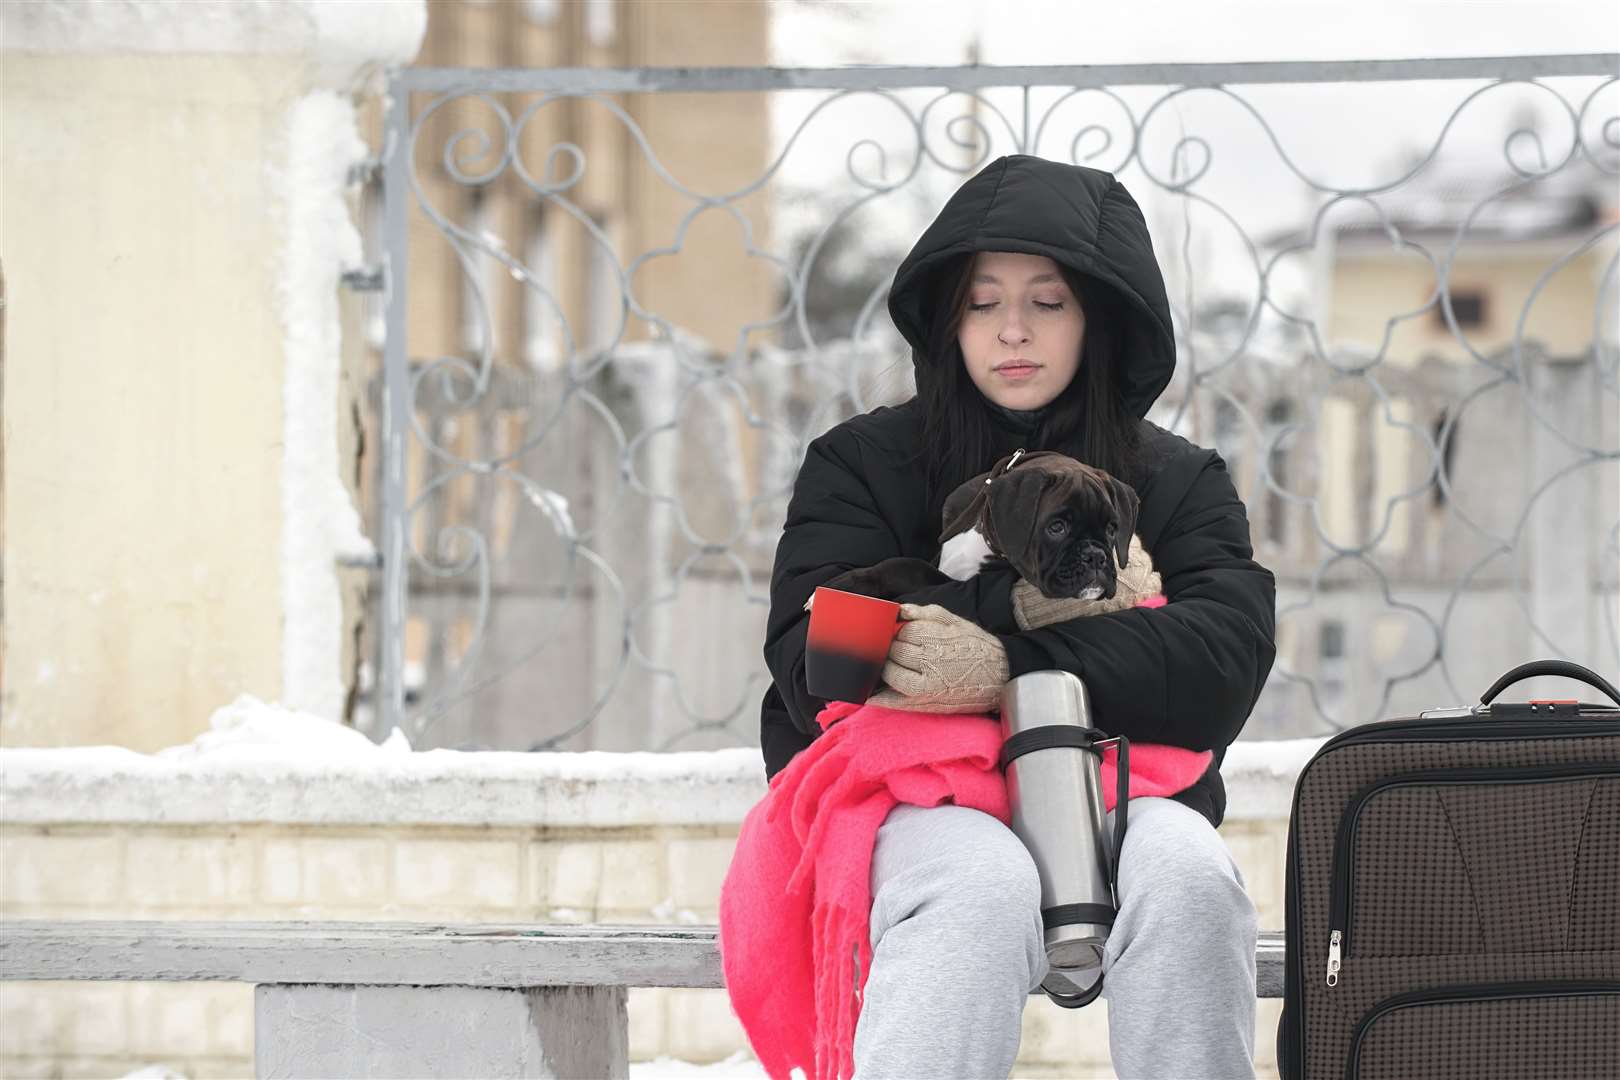 Ukrainian citizens fleeing the war are often seen on news broadcasts with their pets. The question is, can they find refuge with their beloved animals?